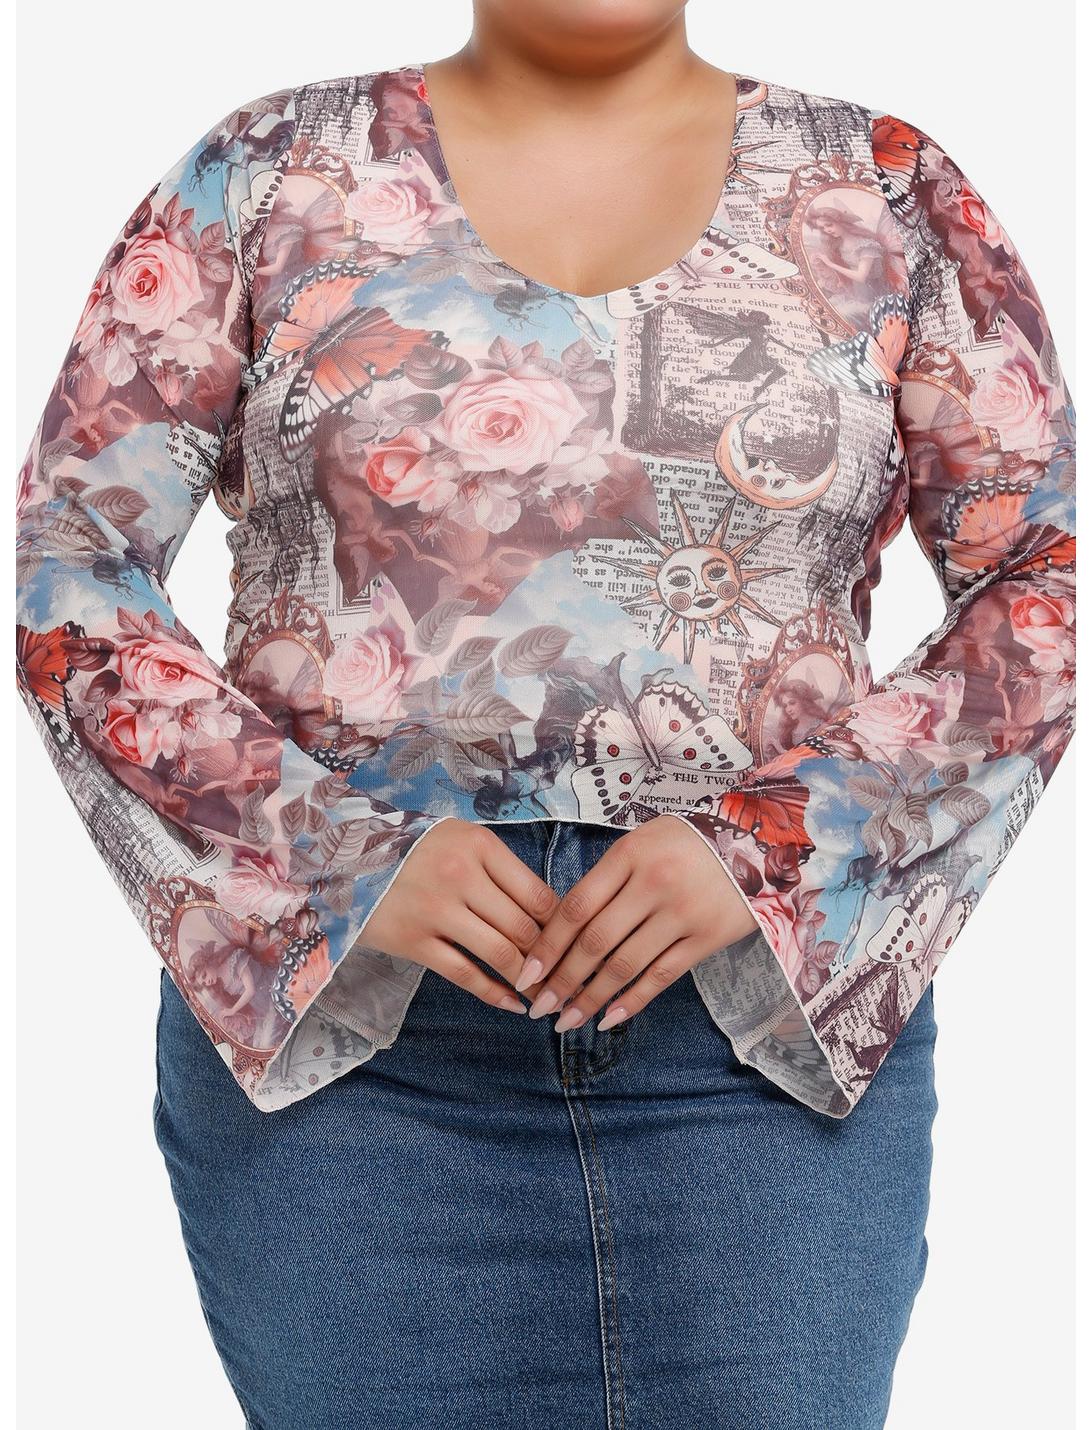 Thorn & Fable Celestial Paintings Bell Sleeve Girls Top Plus Size, MULTI, hi-res